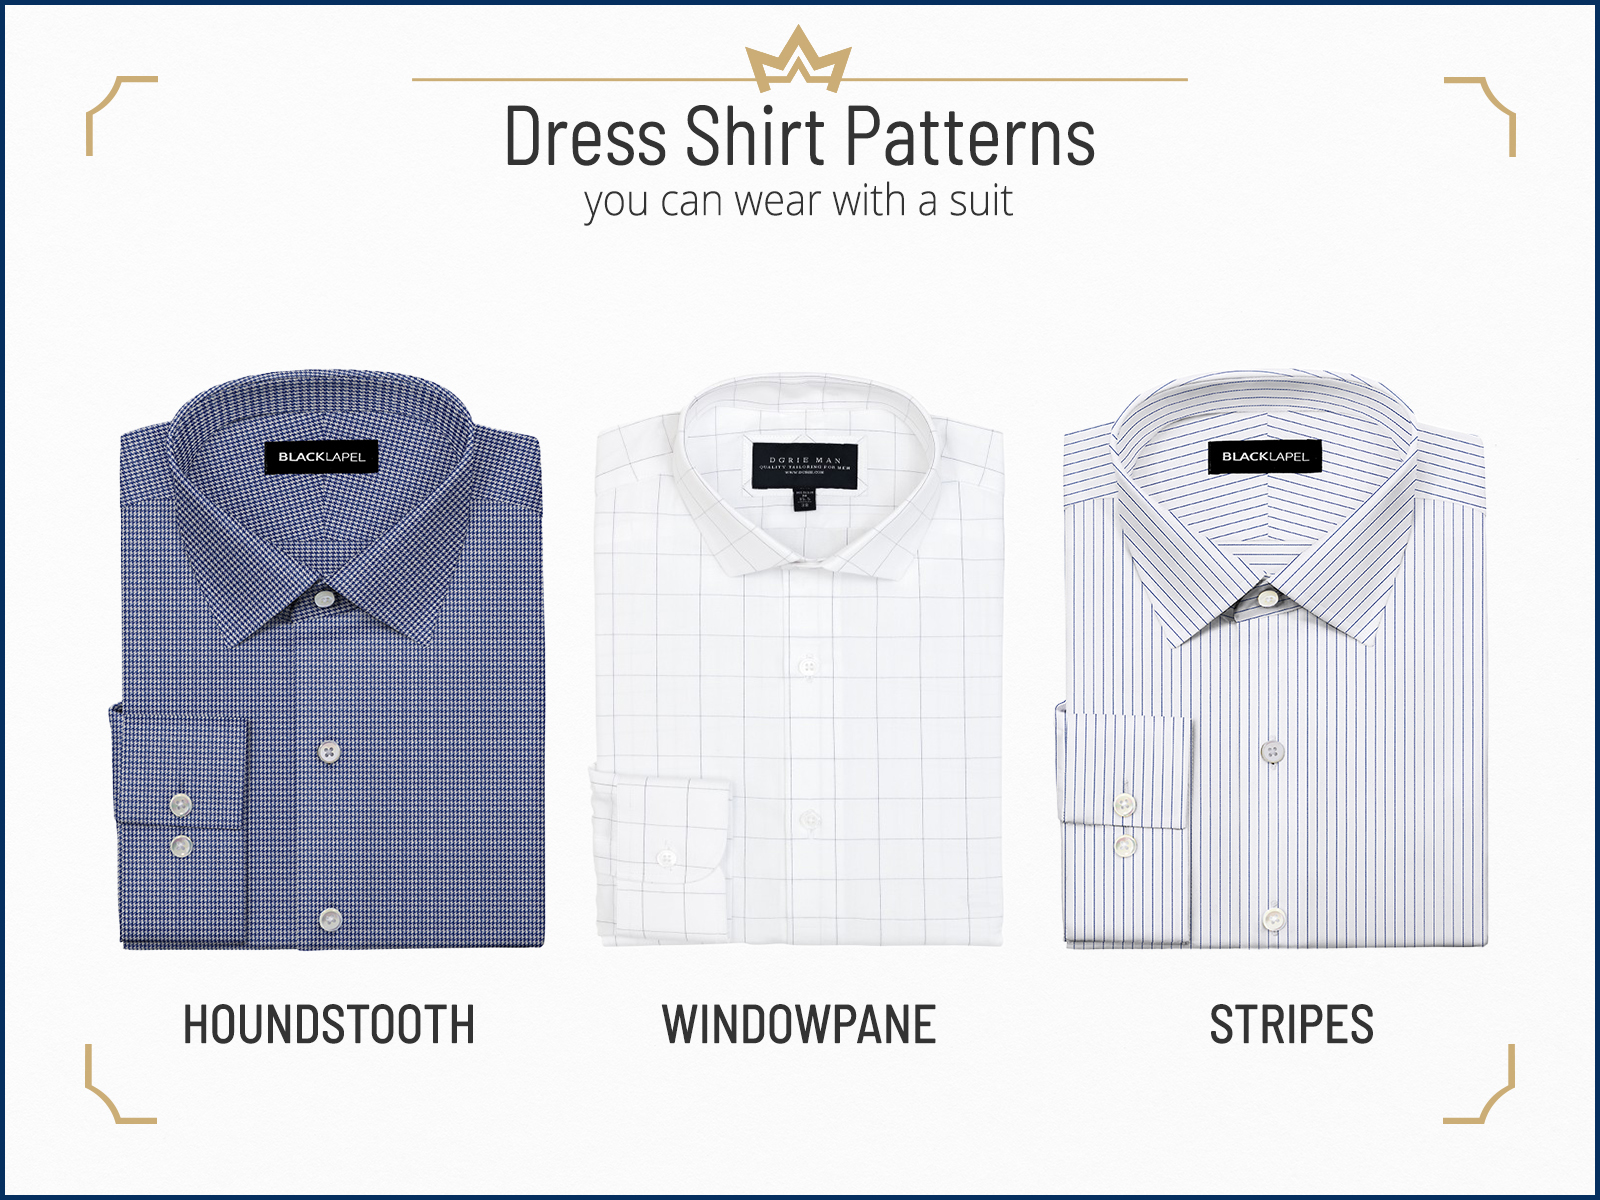 Dress shirt patterns to wear with a suit